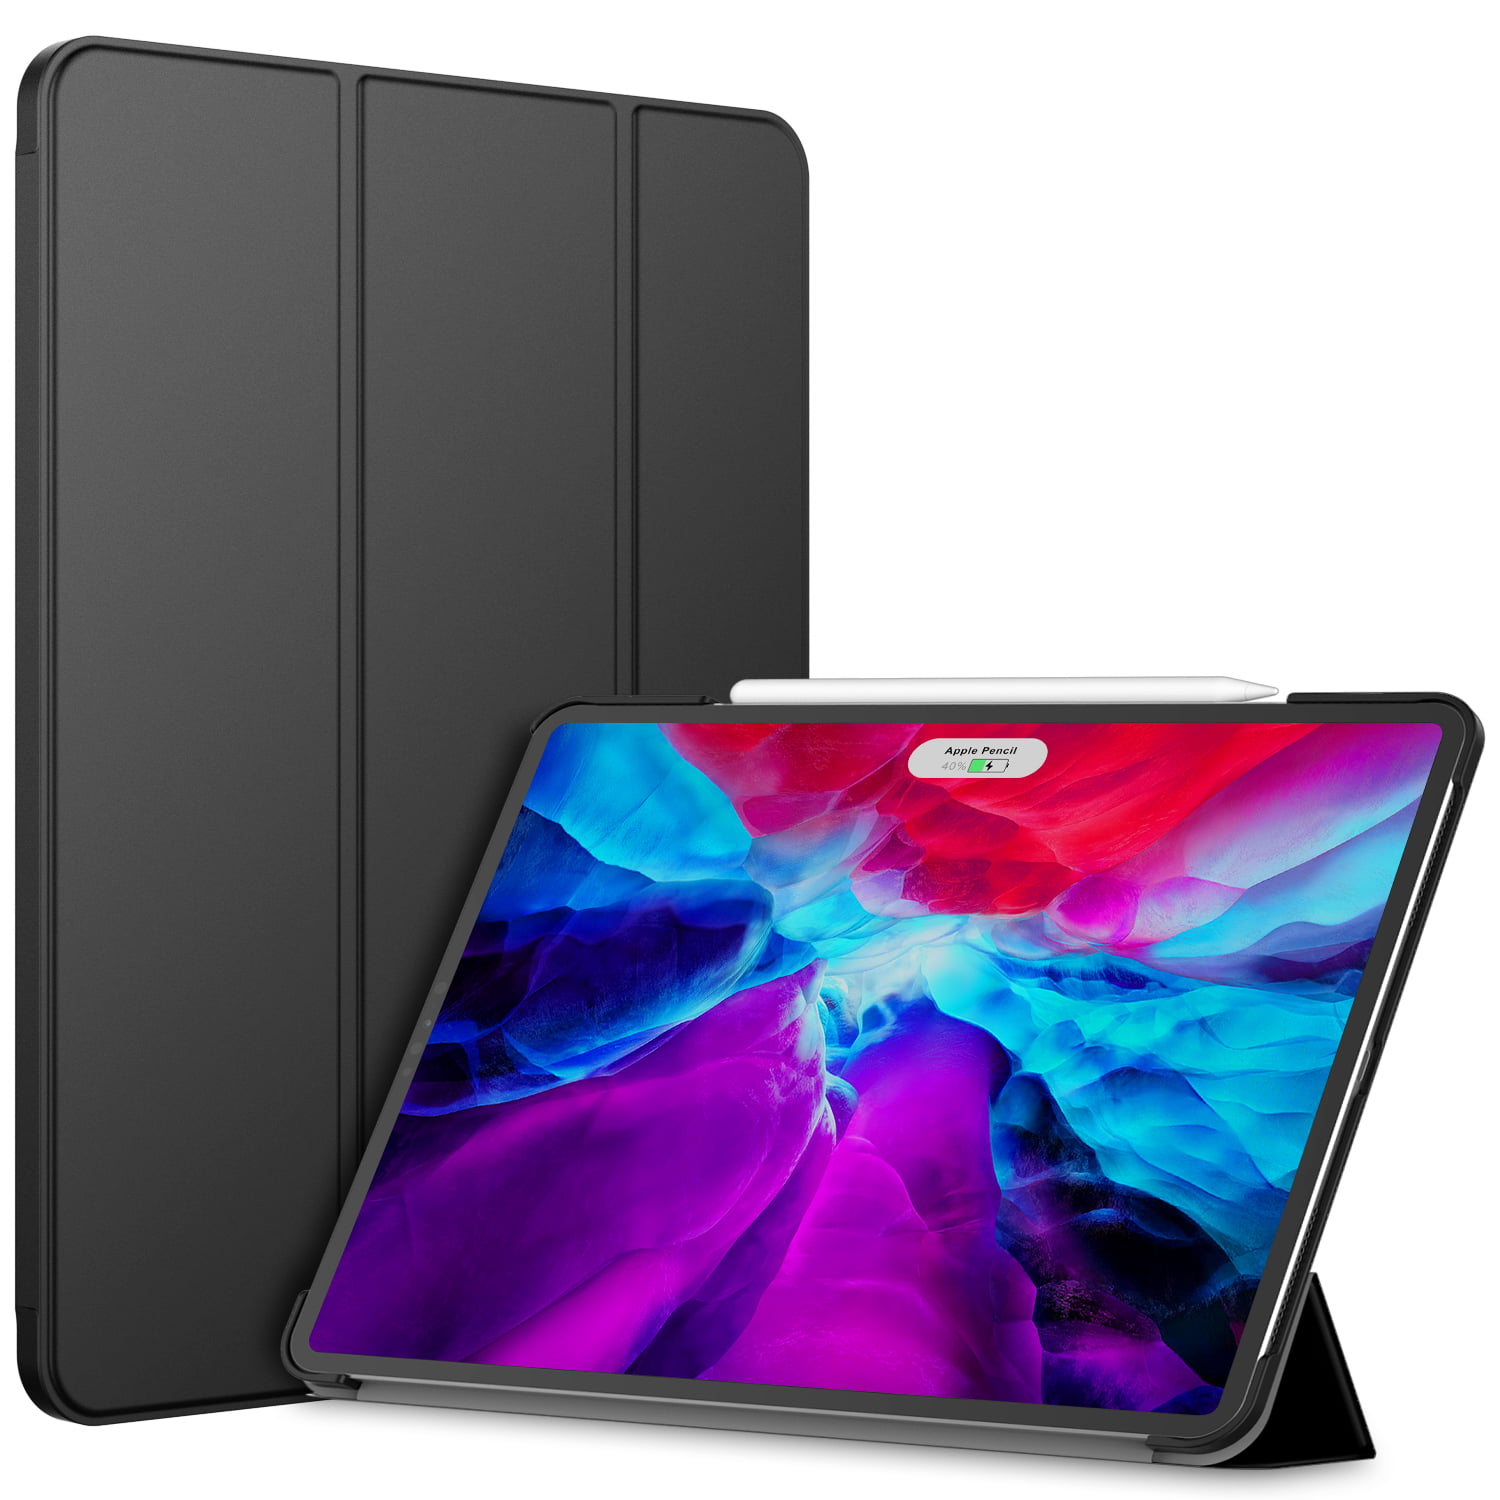 Case for iPad Pro 12.9 Inch (4th Generation, 2020 Model), Compatible